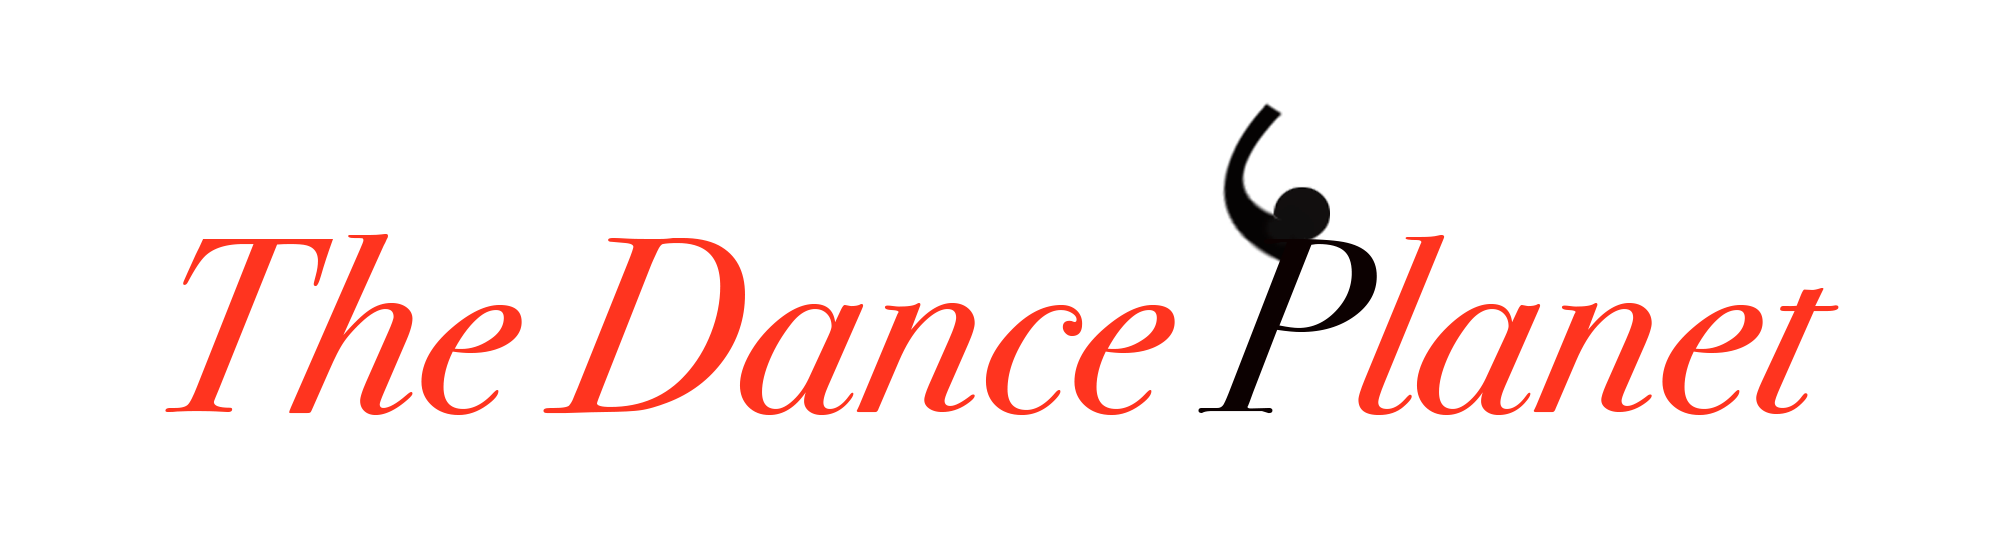 The Dance Planet